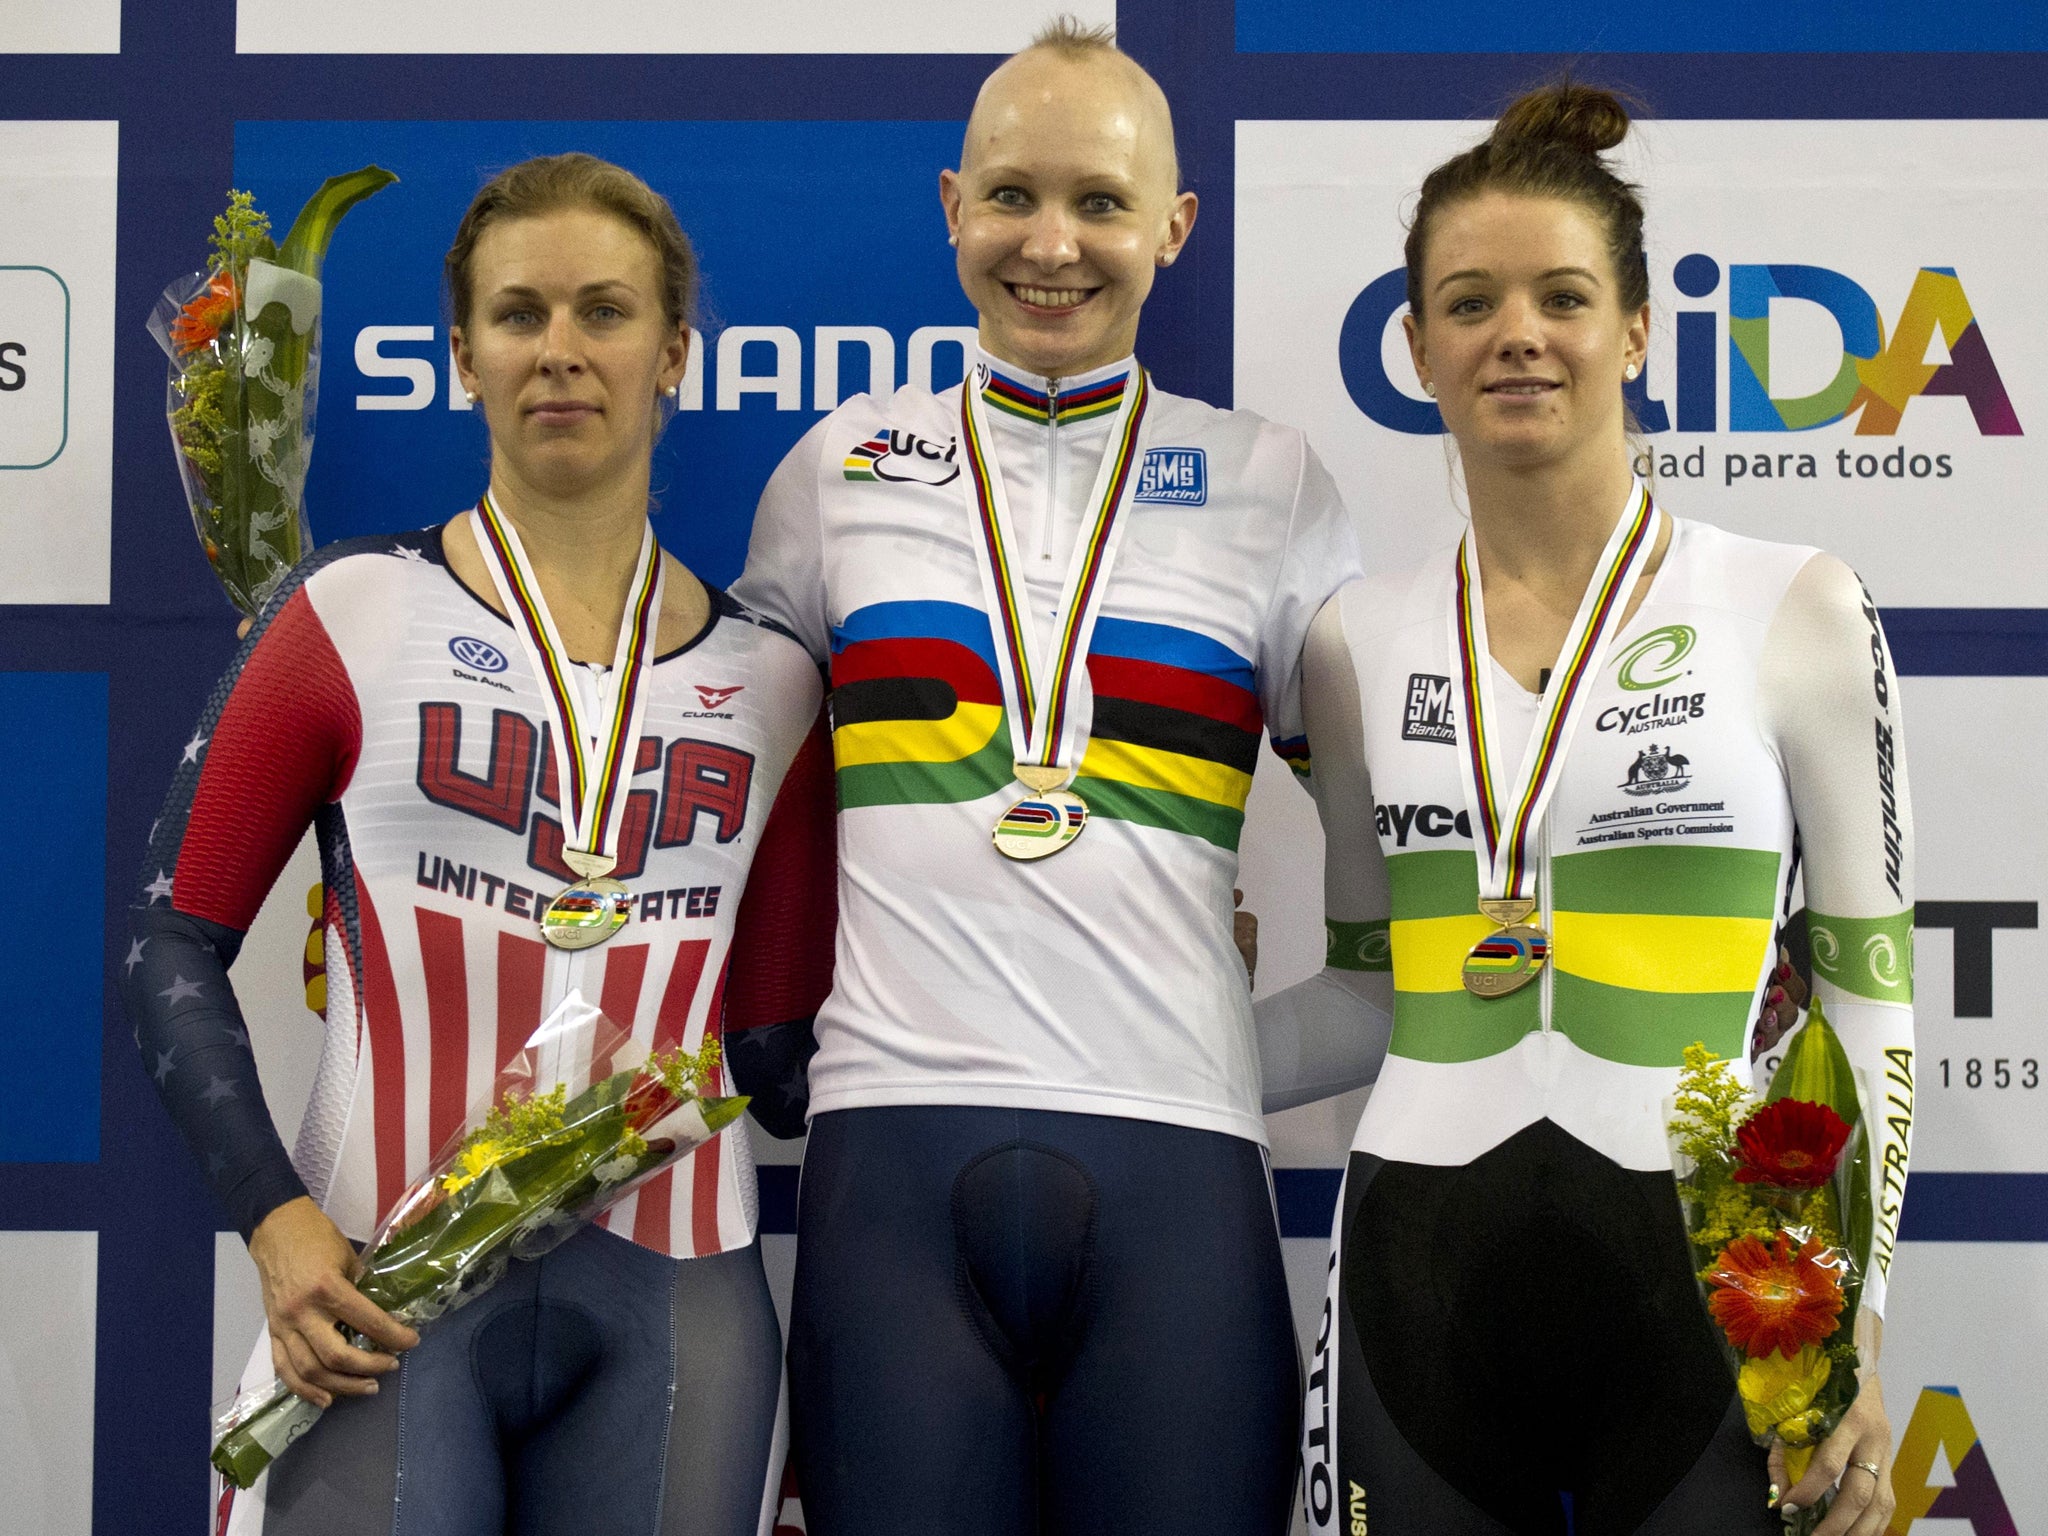 Joanna Rowsell claimed gold in the individual pursuit at the Track Cycling World Championships